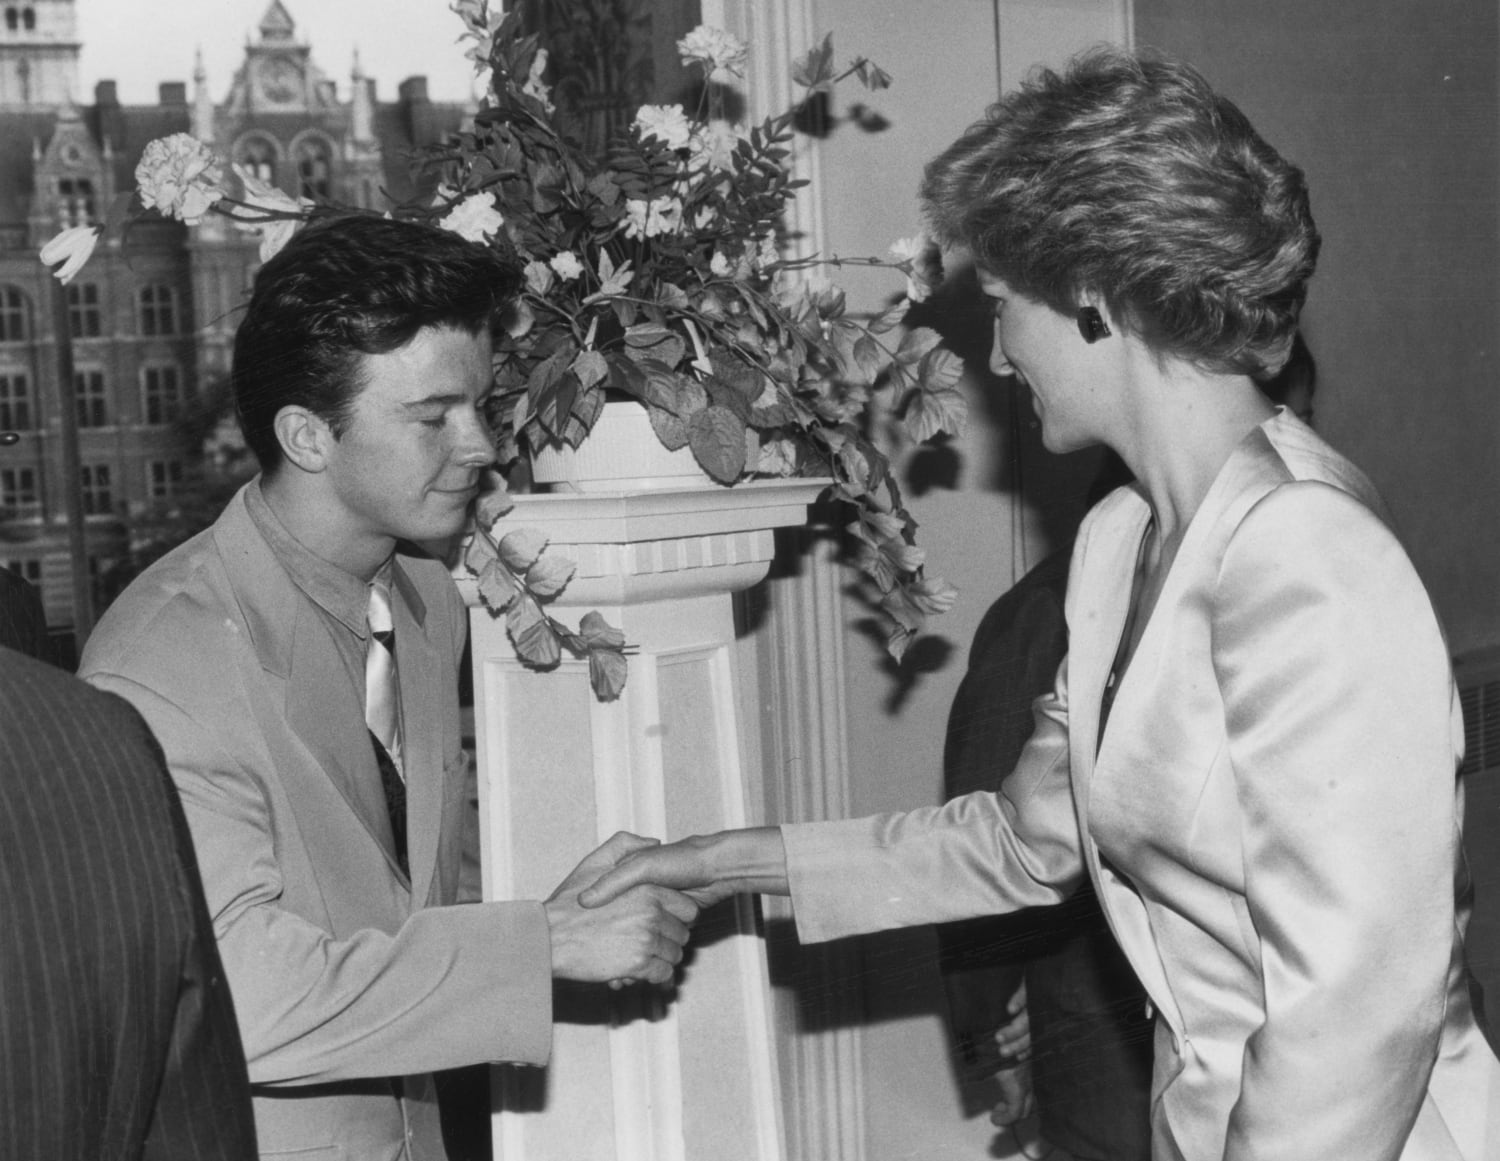 Rick Astley meeting Princess Diana after rolling to No. 1 in 1988